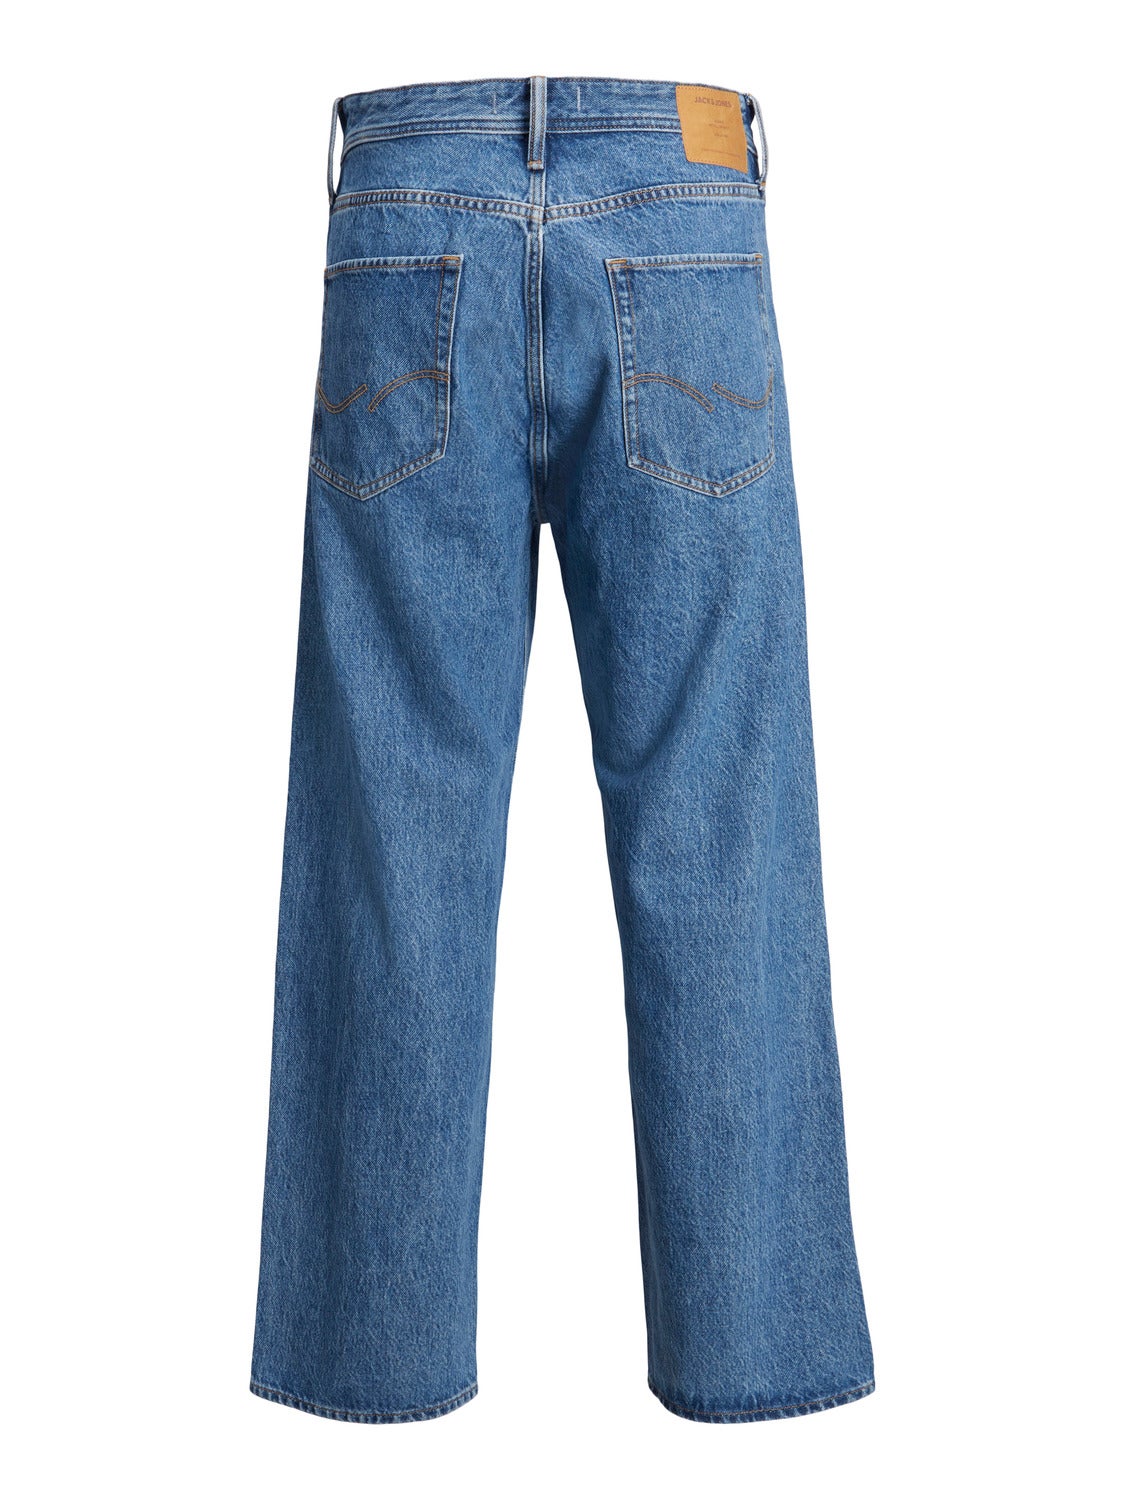 Jack And Jones Mens Jeans at Rs 450/piece in Kurnool | ID: 2851545748688